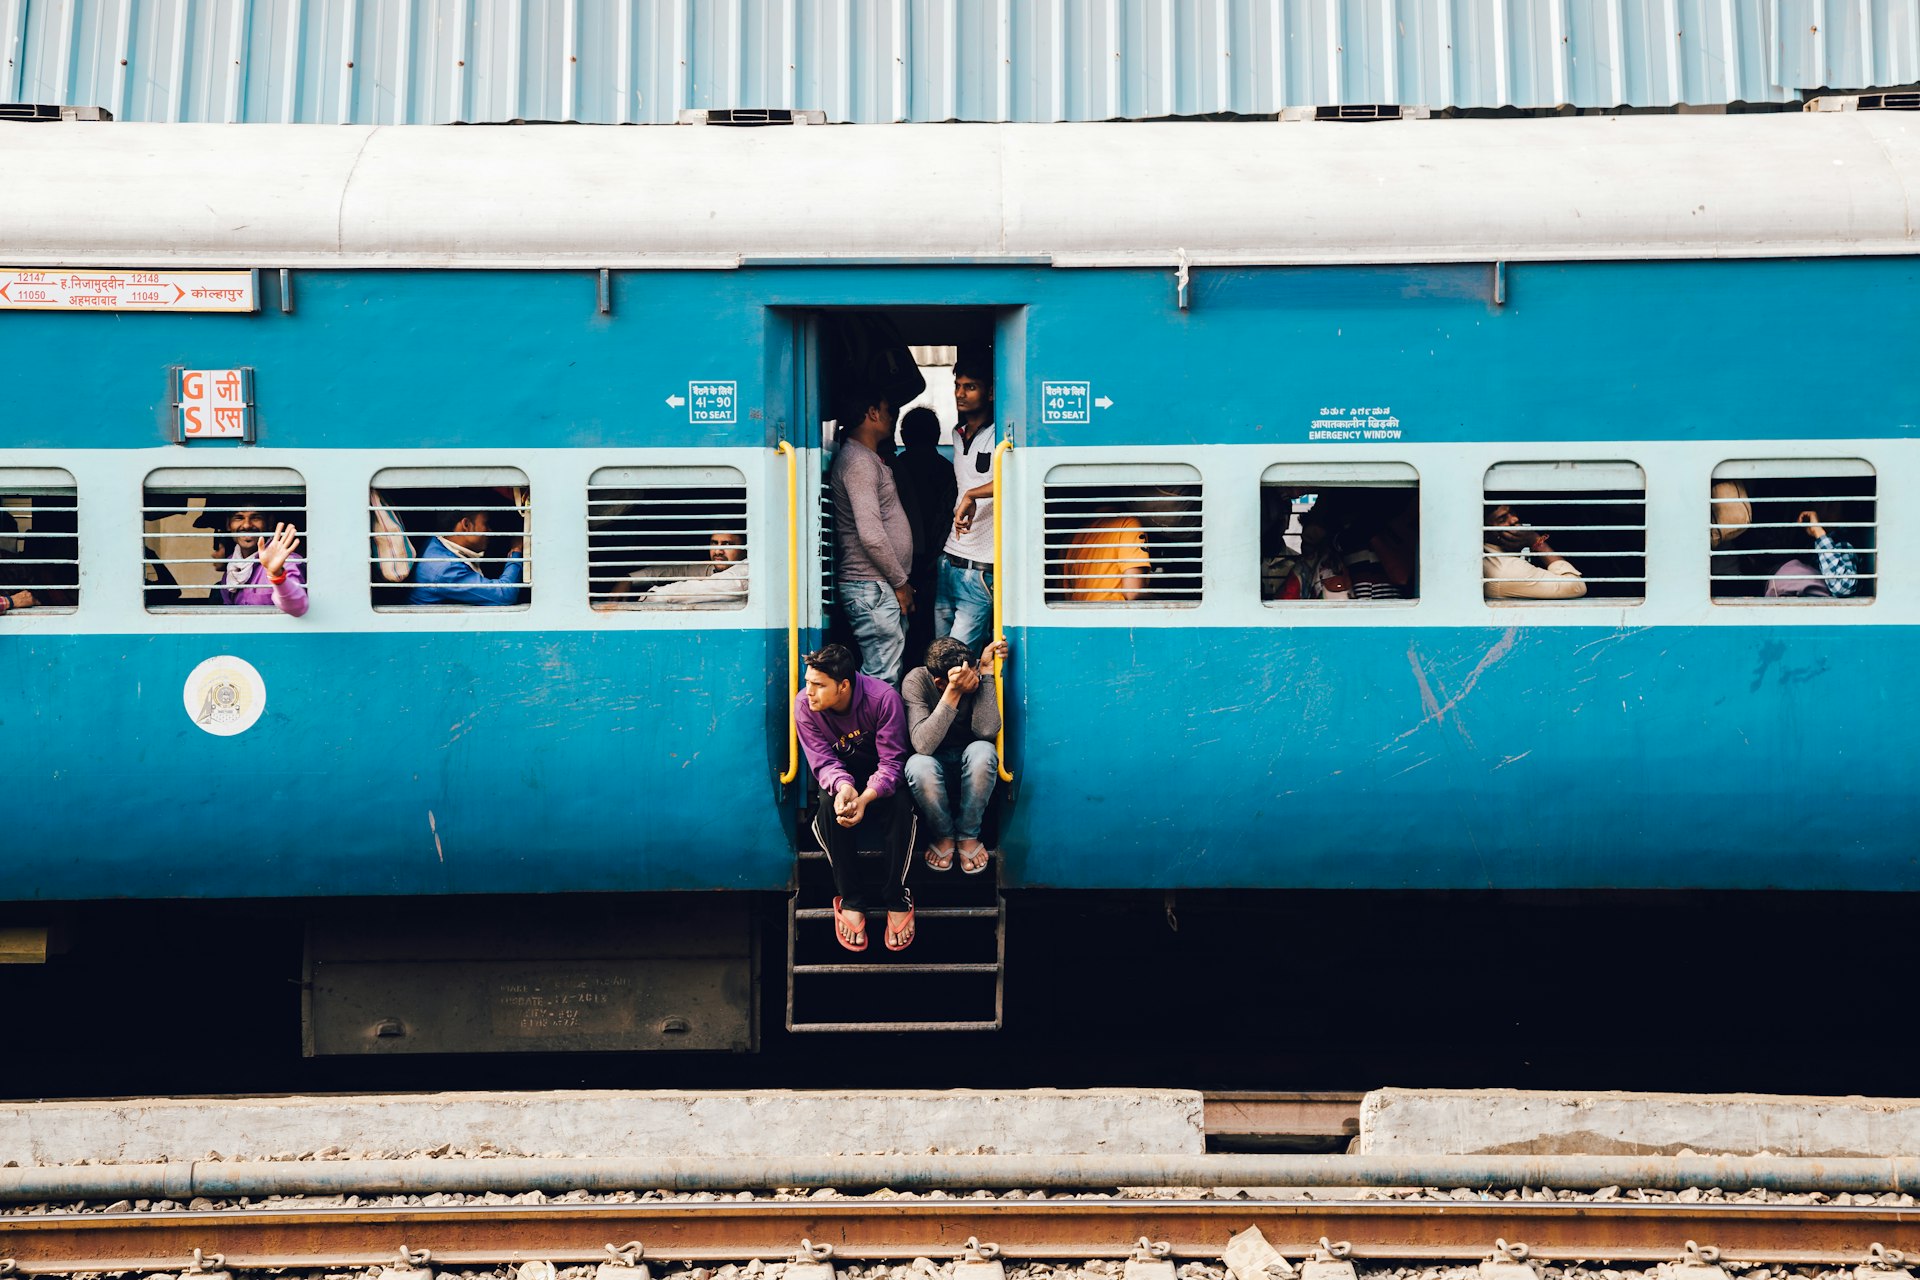 Passengers squeeze into an Indian train at Gwalior